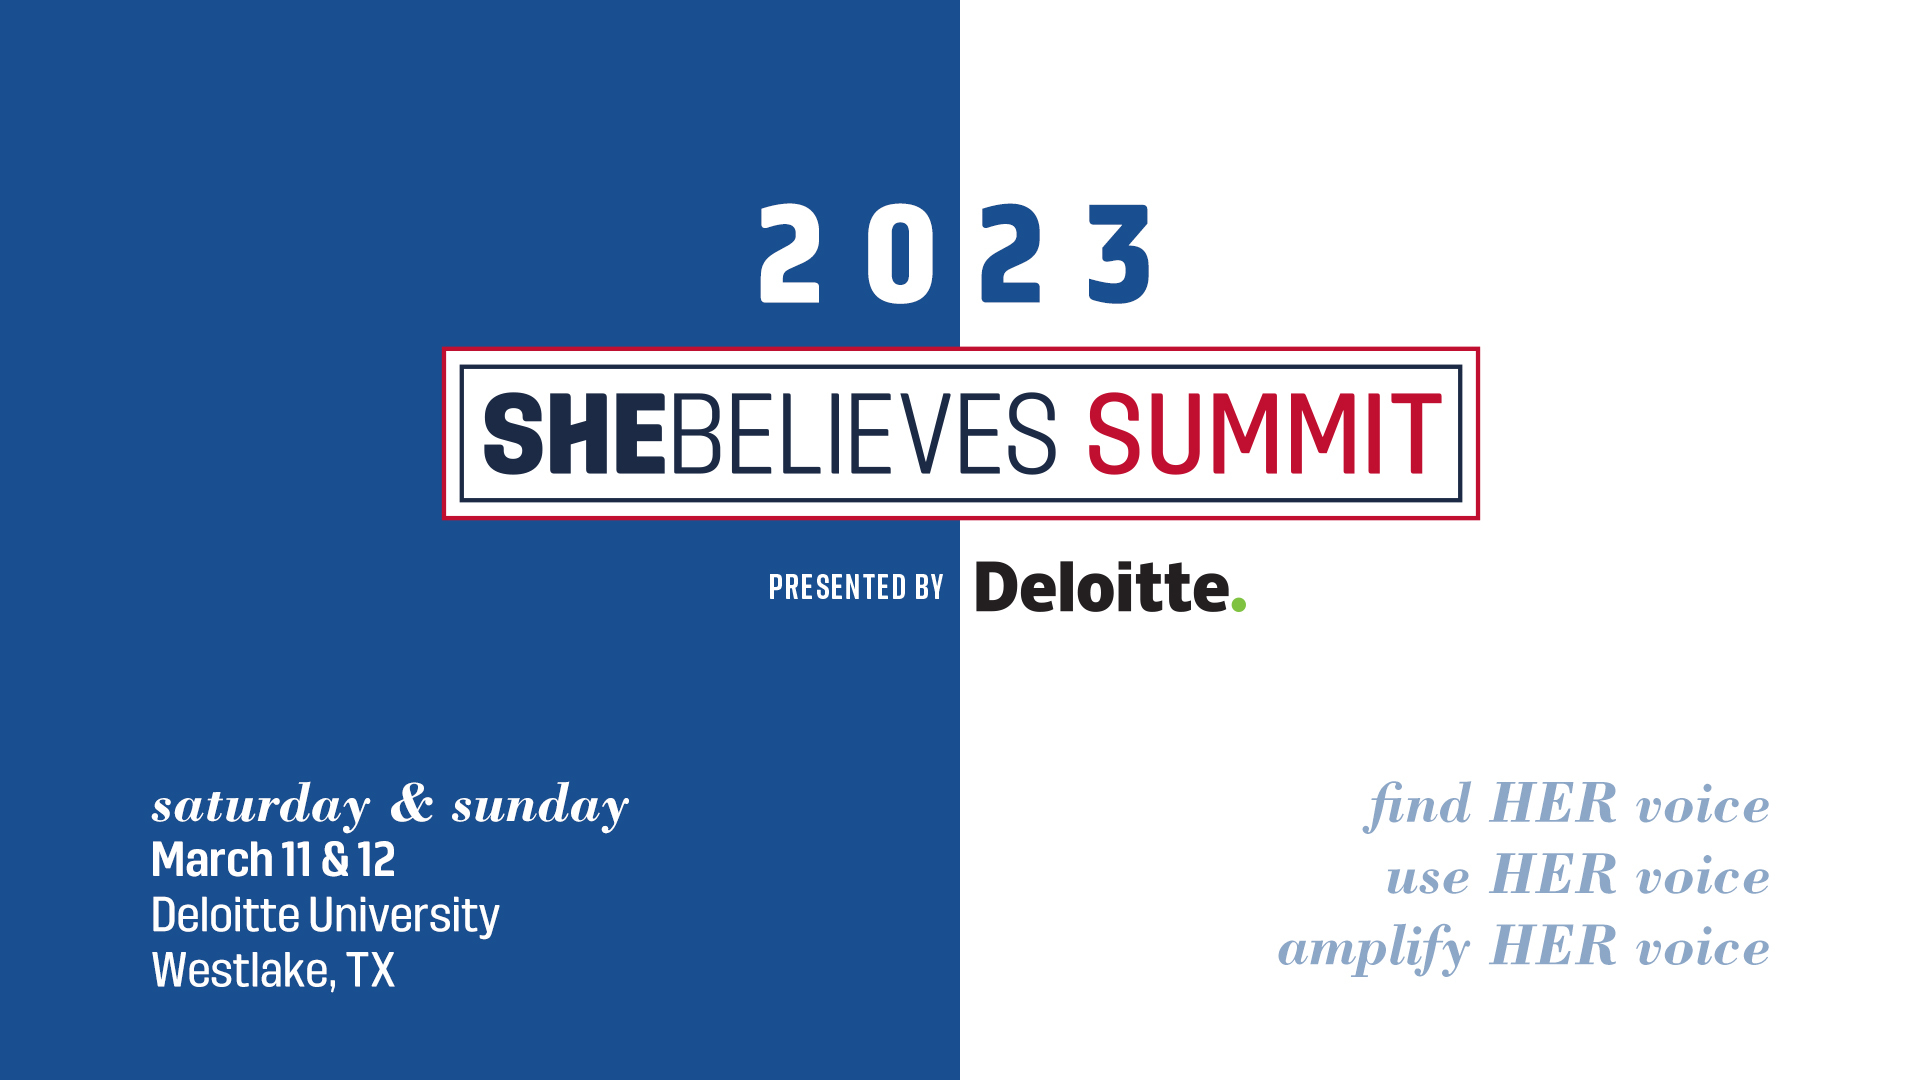 U.S. Soccer 2023 SheBelieves Summit, Presented By Deloitte, To Be Held